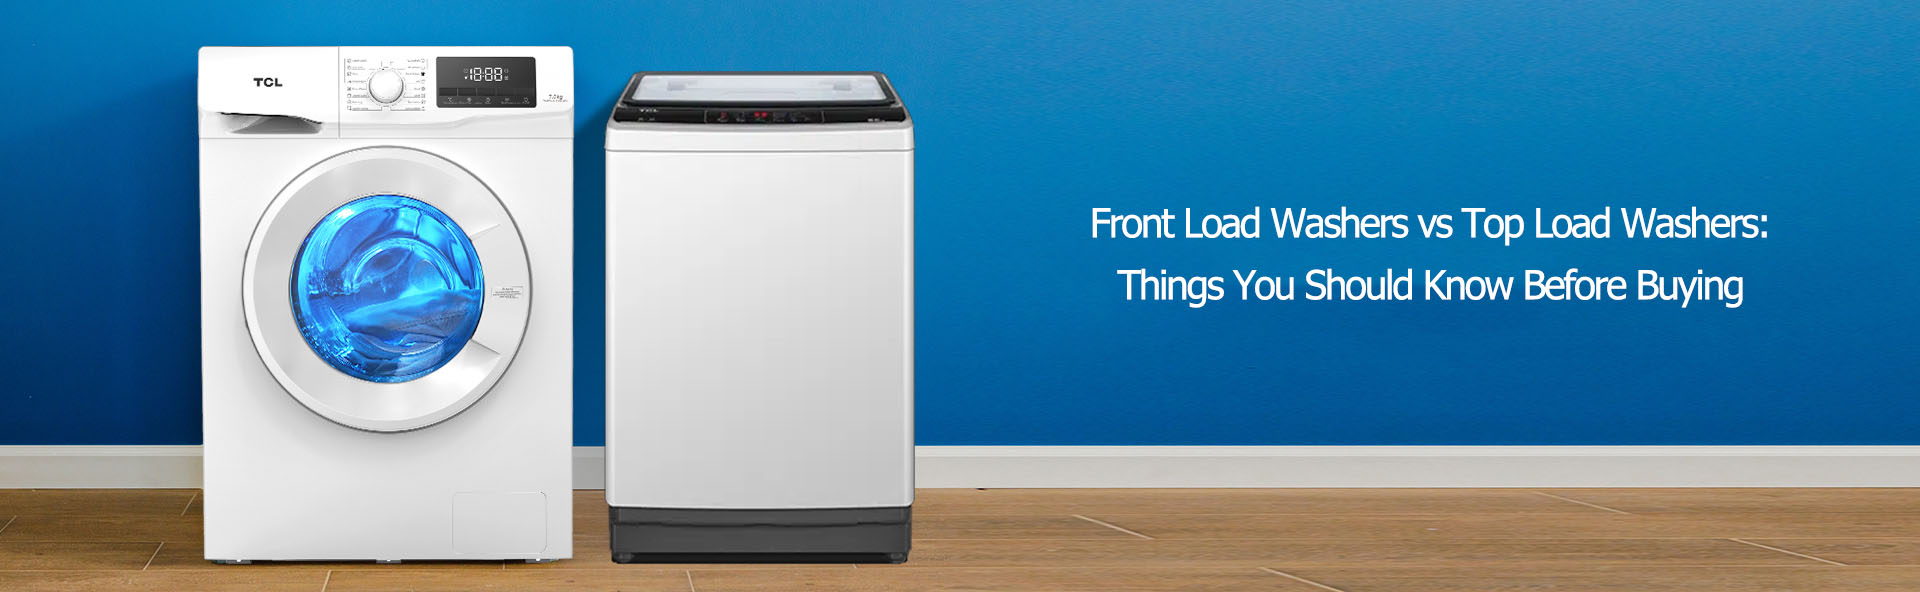 Front Load Washers vs Top Load Washers: Things You Should Know Before Buying